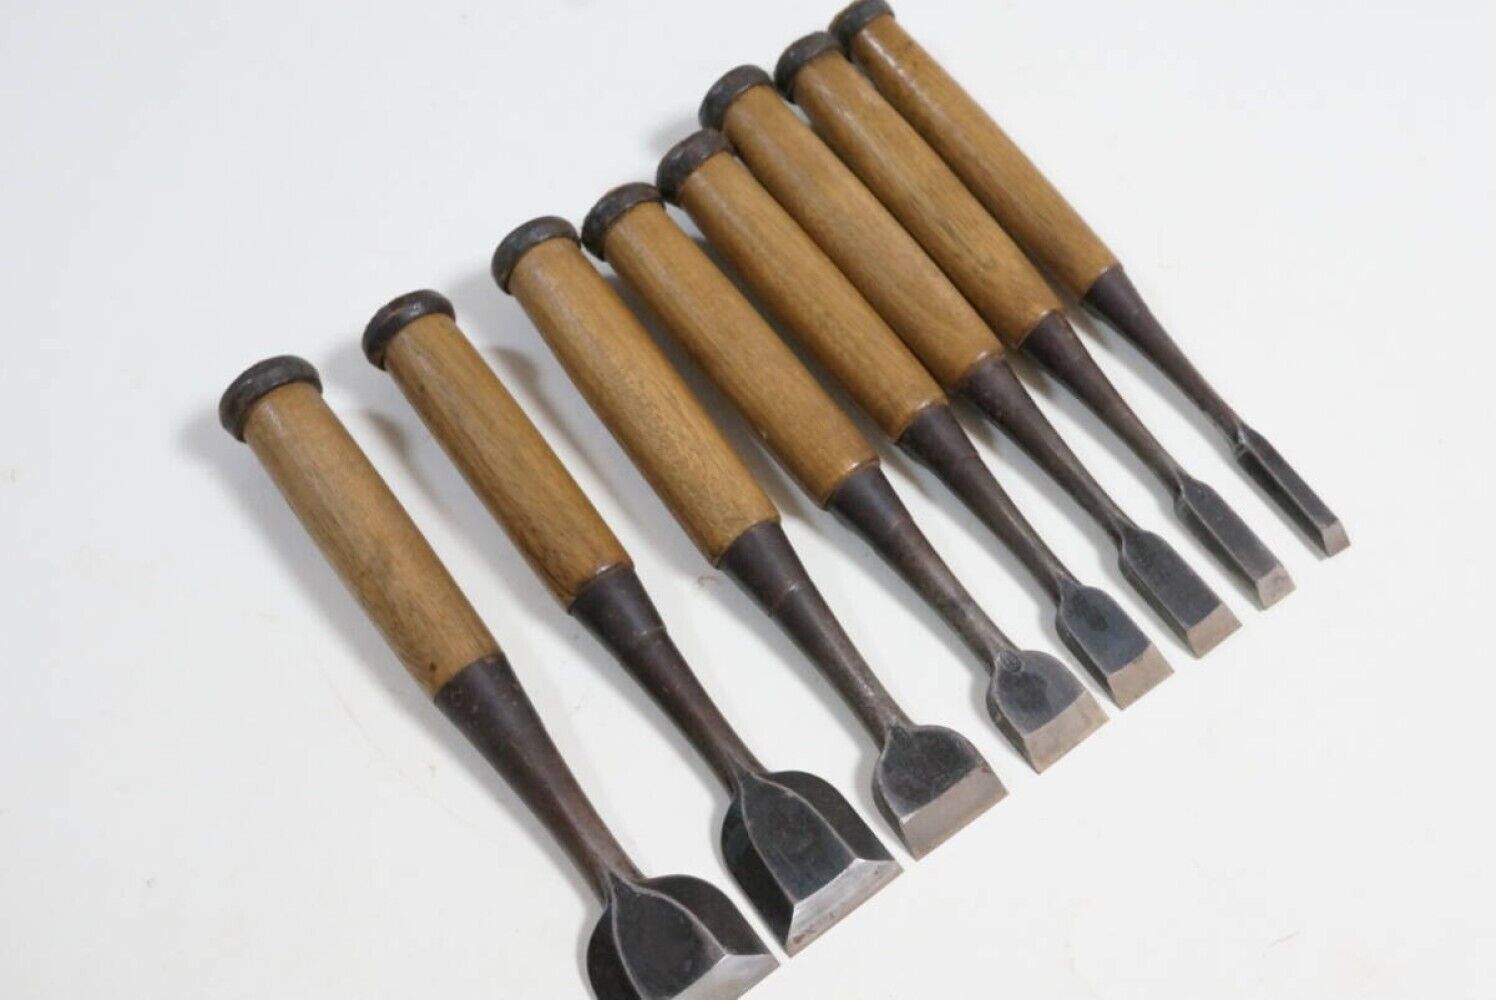 Japanese Vintage Chisel 8set Nomi made by famous blacksmith Naohide /y12